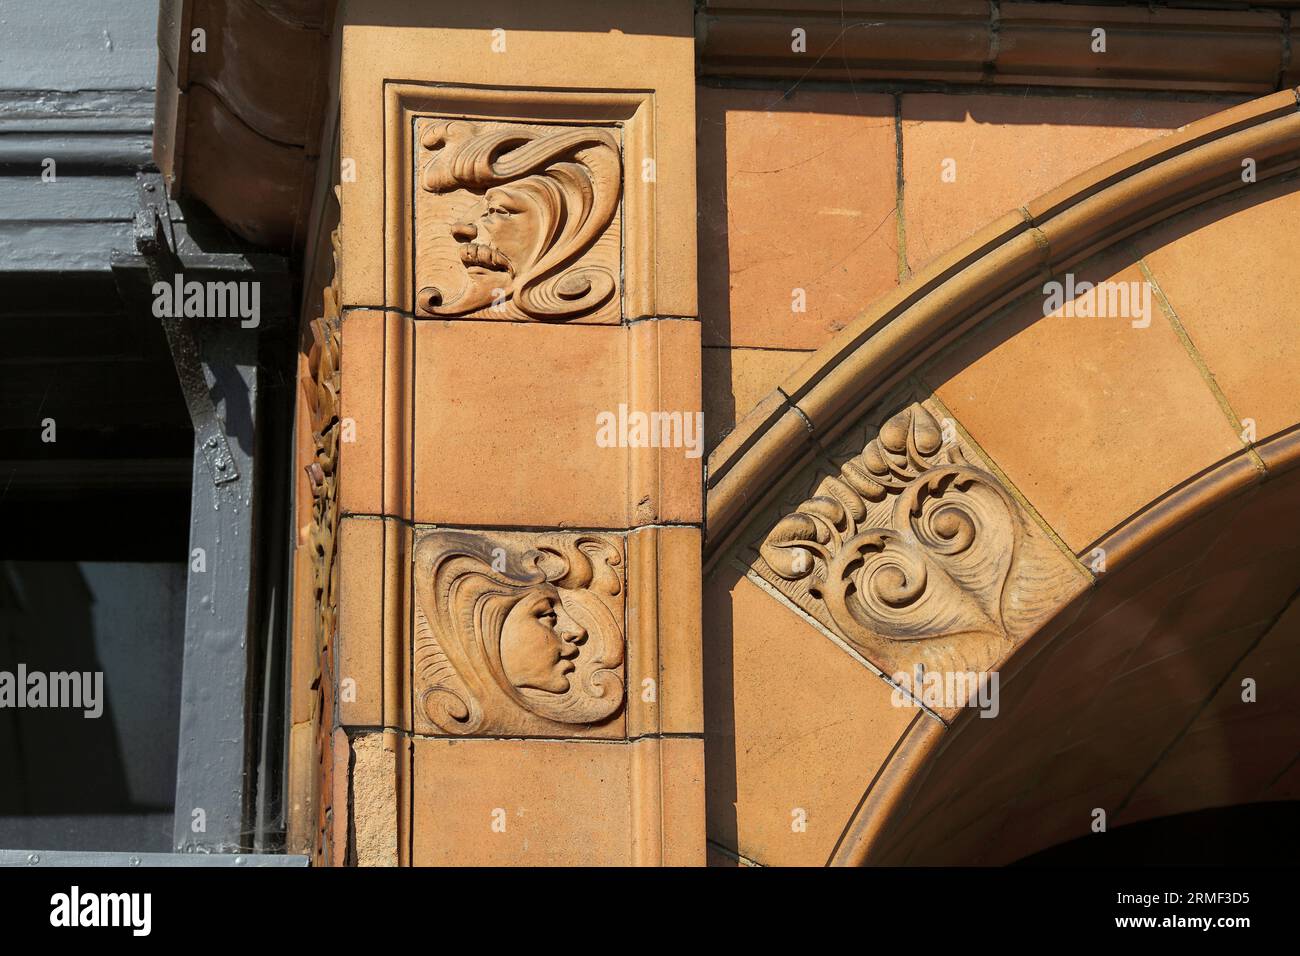 Close up of details on the facade of the Great Yarmouth Hippodrome showing terracotta tiles with art nouveau designs. Stock Photo